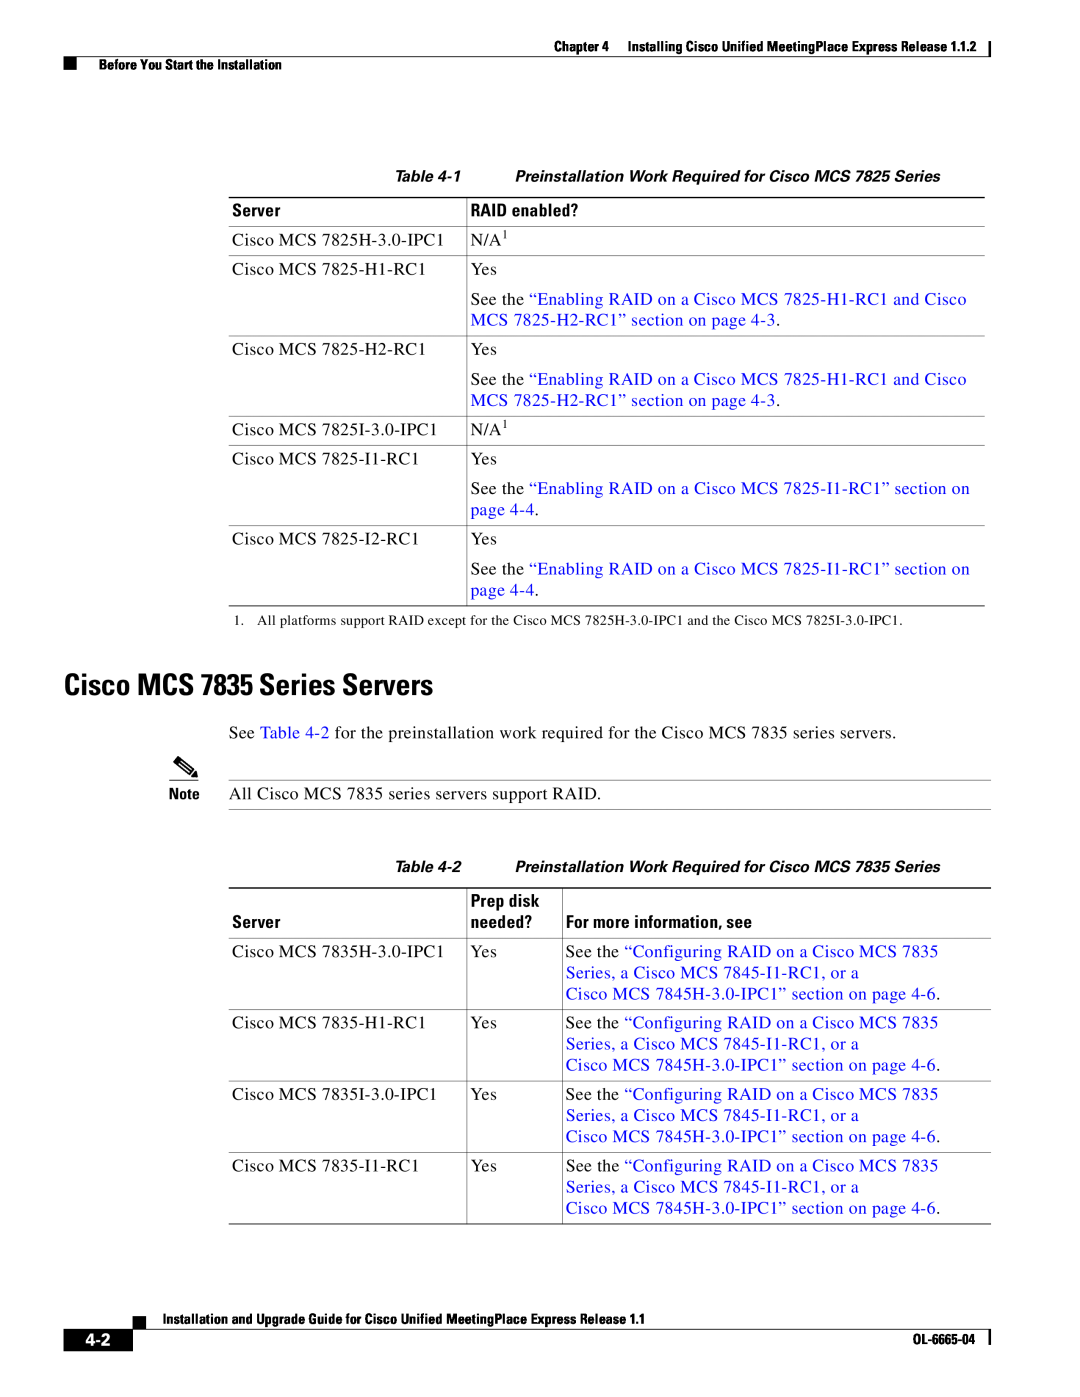 Cisco Systems MCS 7845 Cisco MCS 7835 Series Servers, RAID enabled?, MCS 7825-H2-RC1” section on page, Prep disk, needed? 